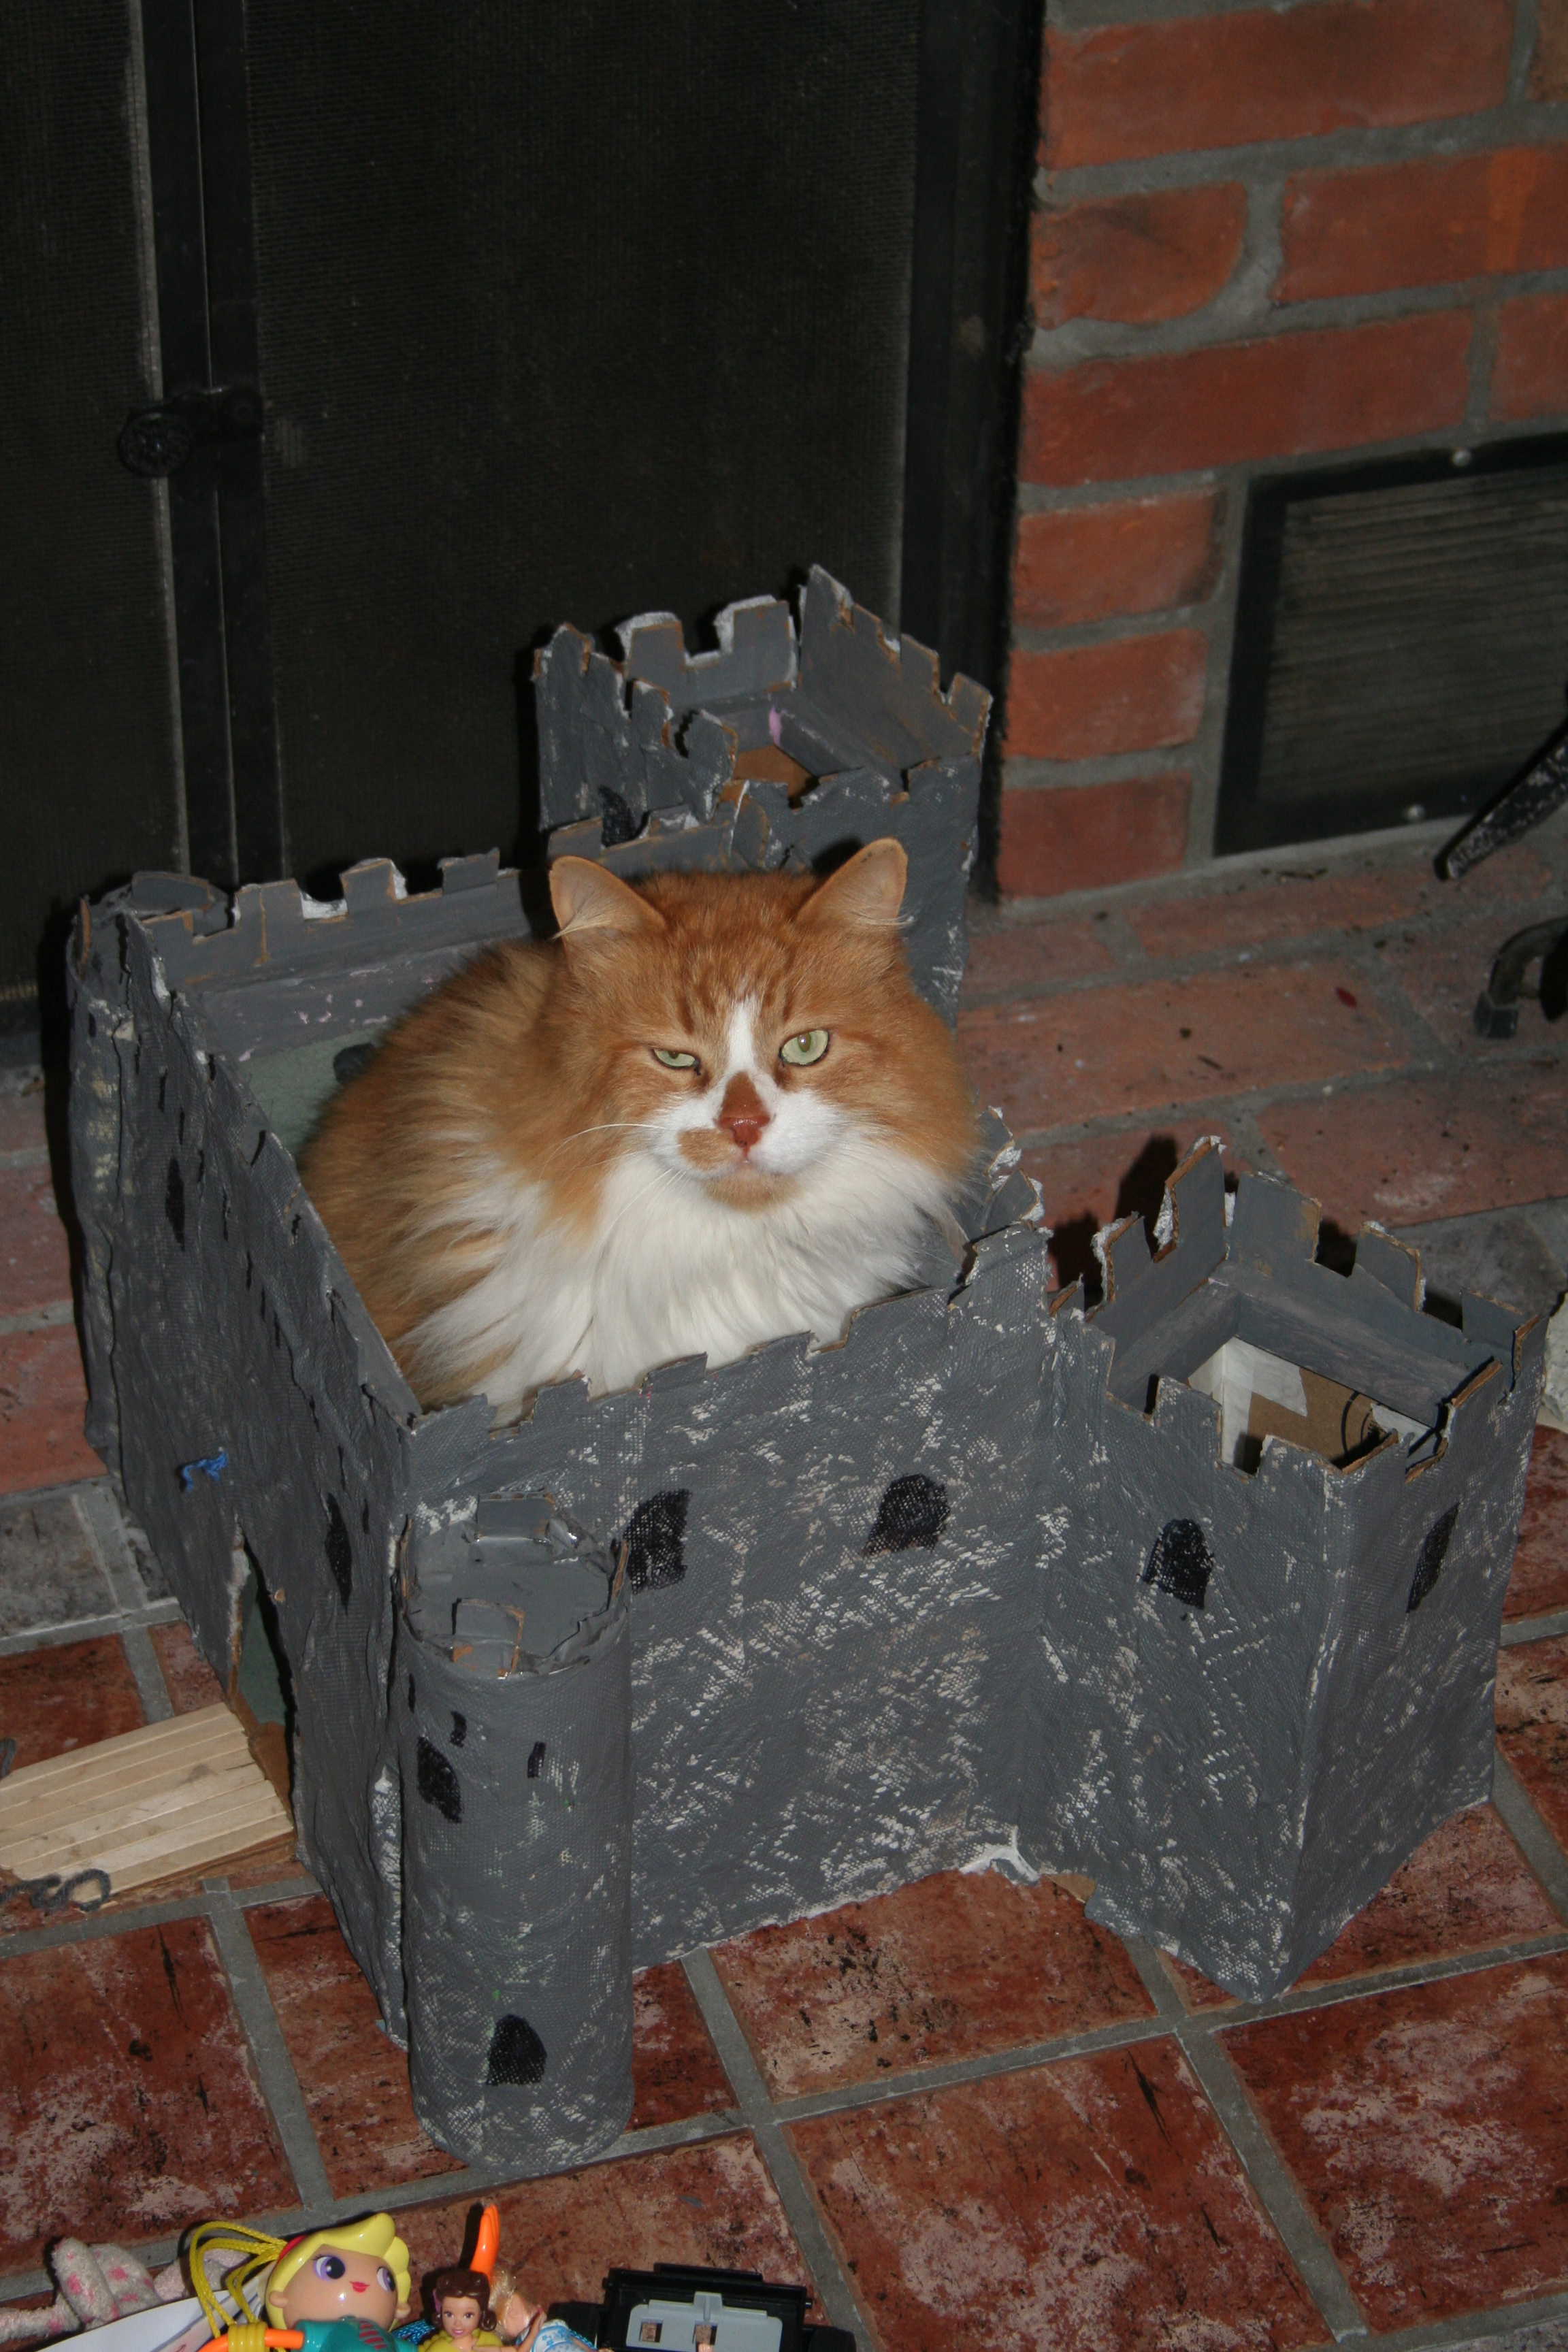 Frank is King of the Castel